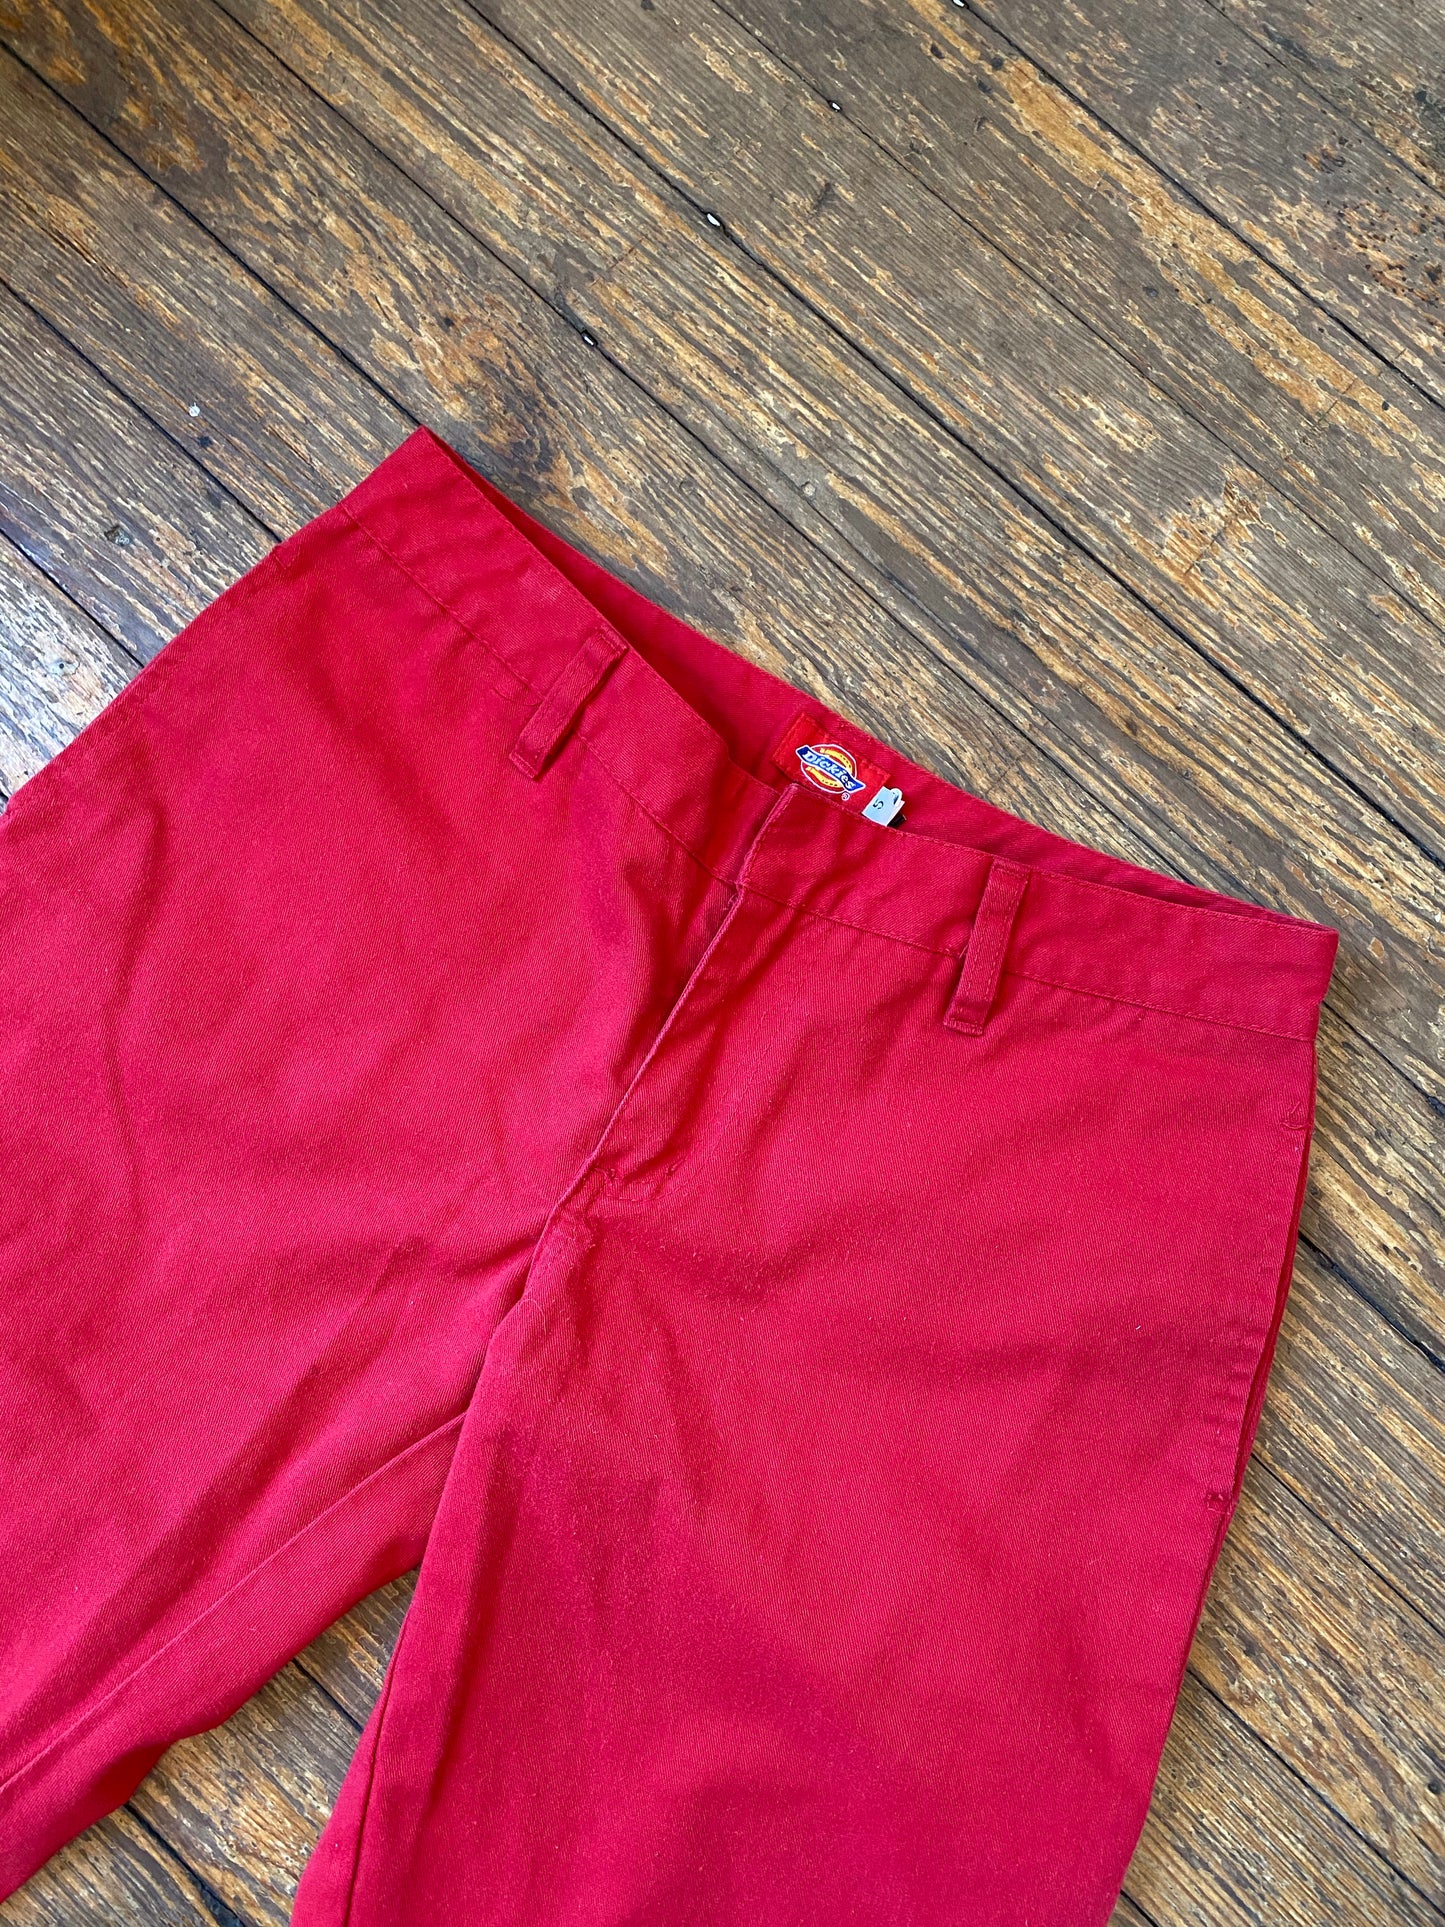 Fire Engine Red Classic Dickies Pants